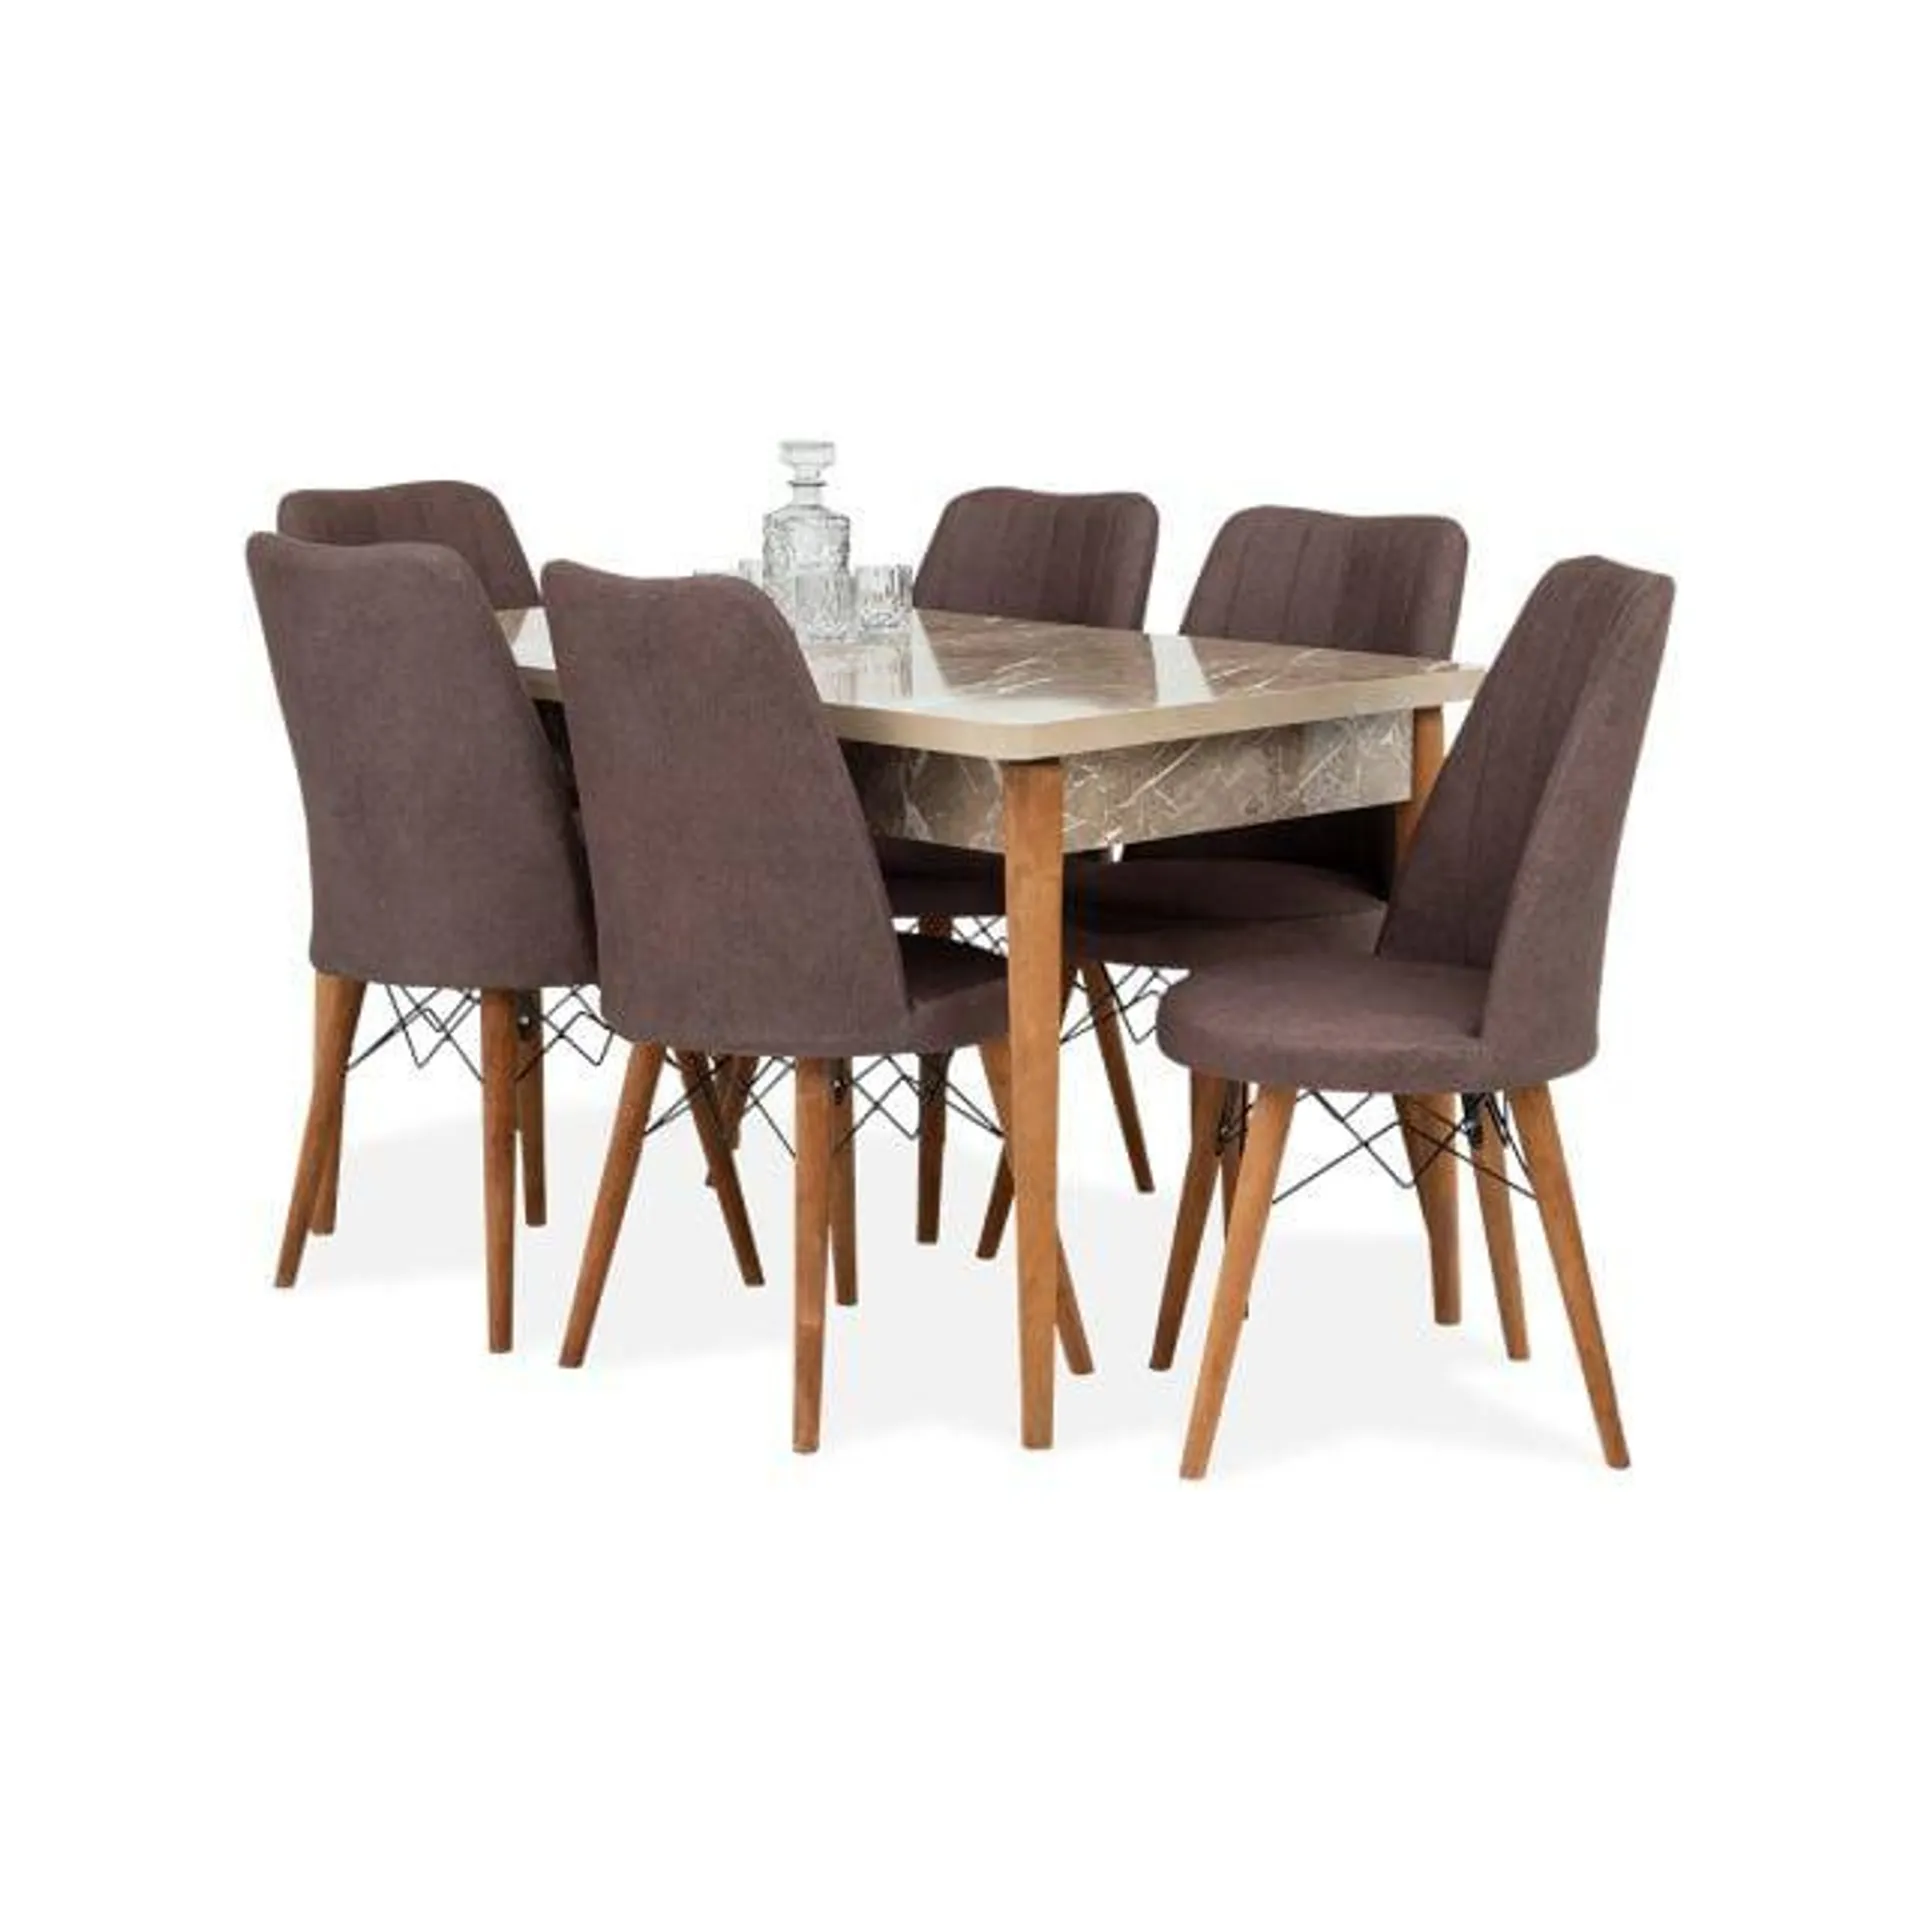 Rania 6 Seater Dining Room Suite